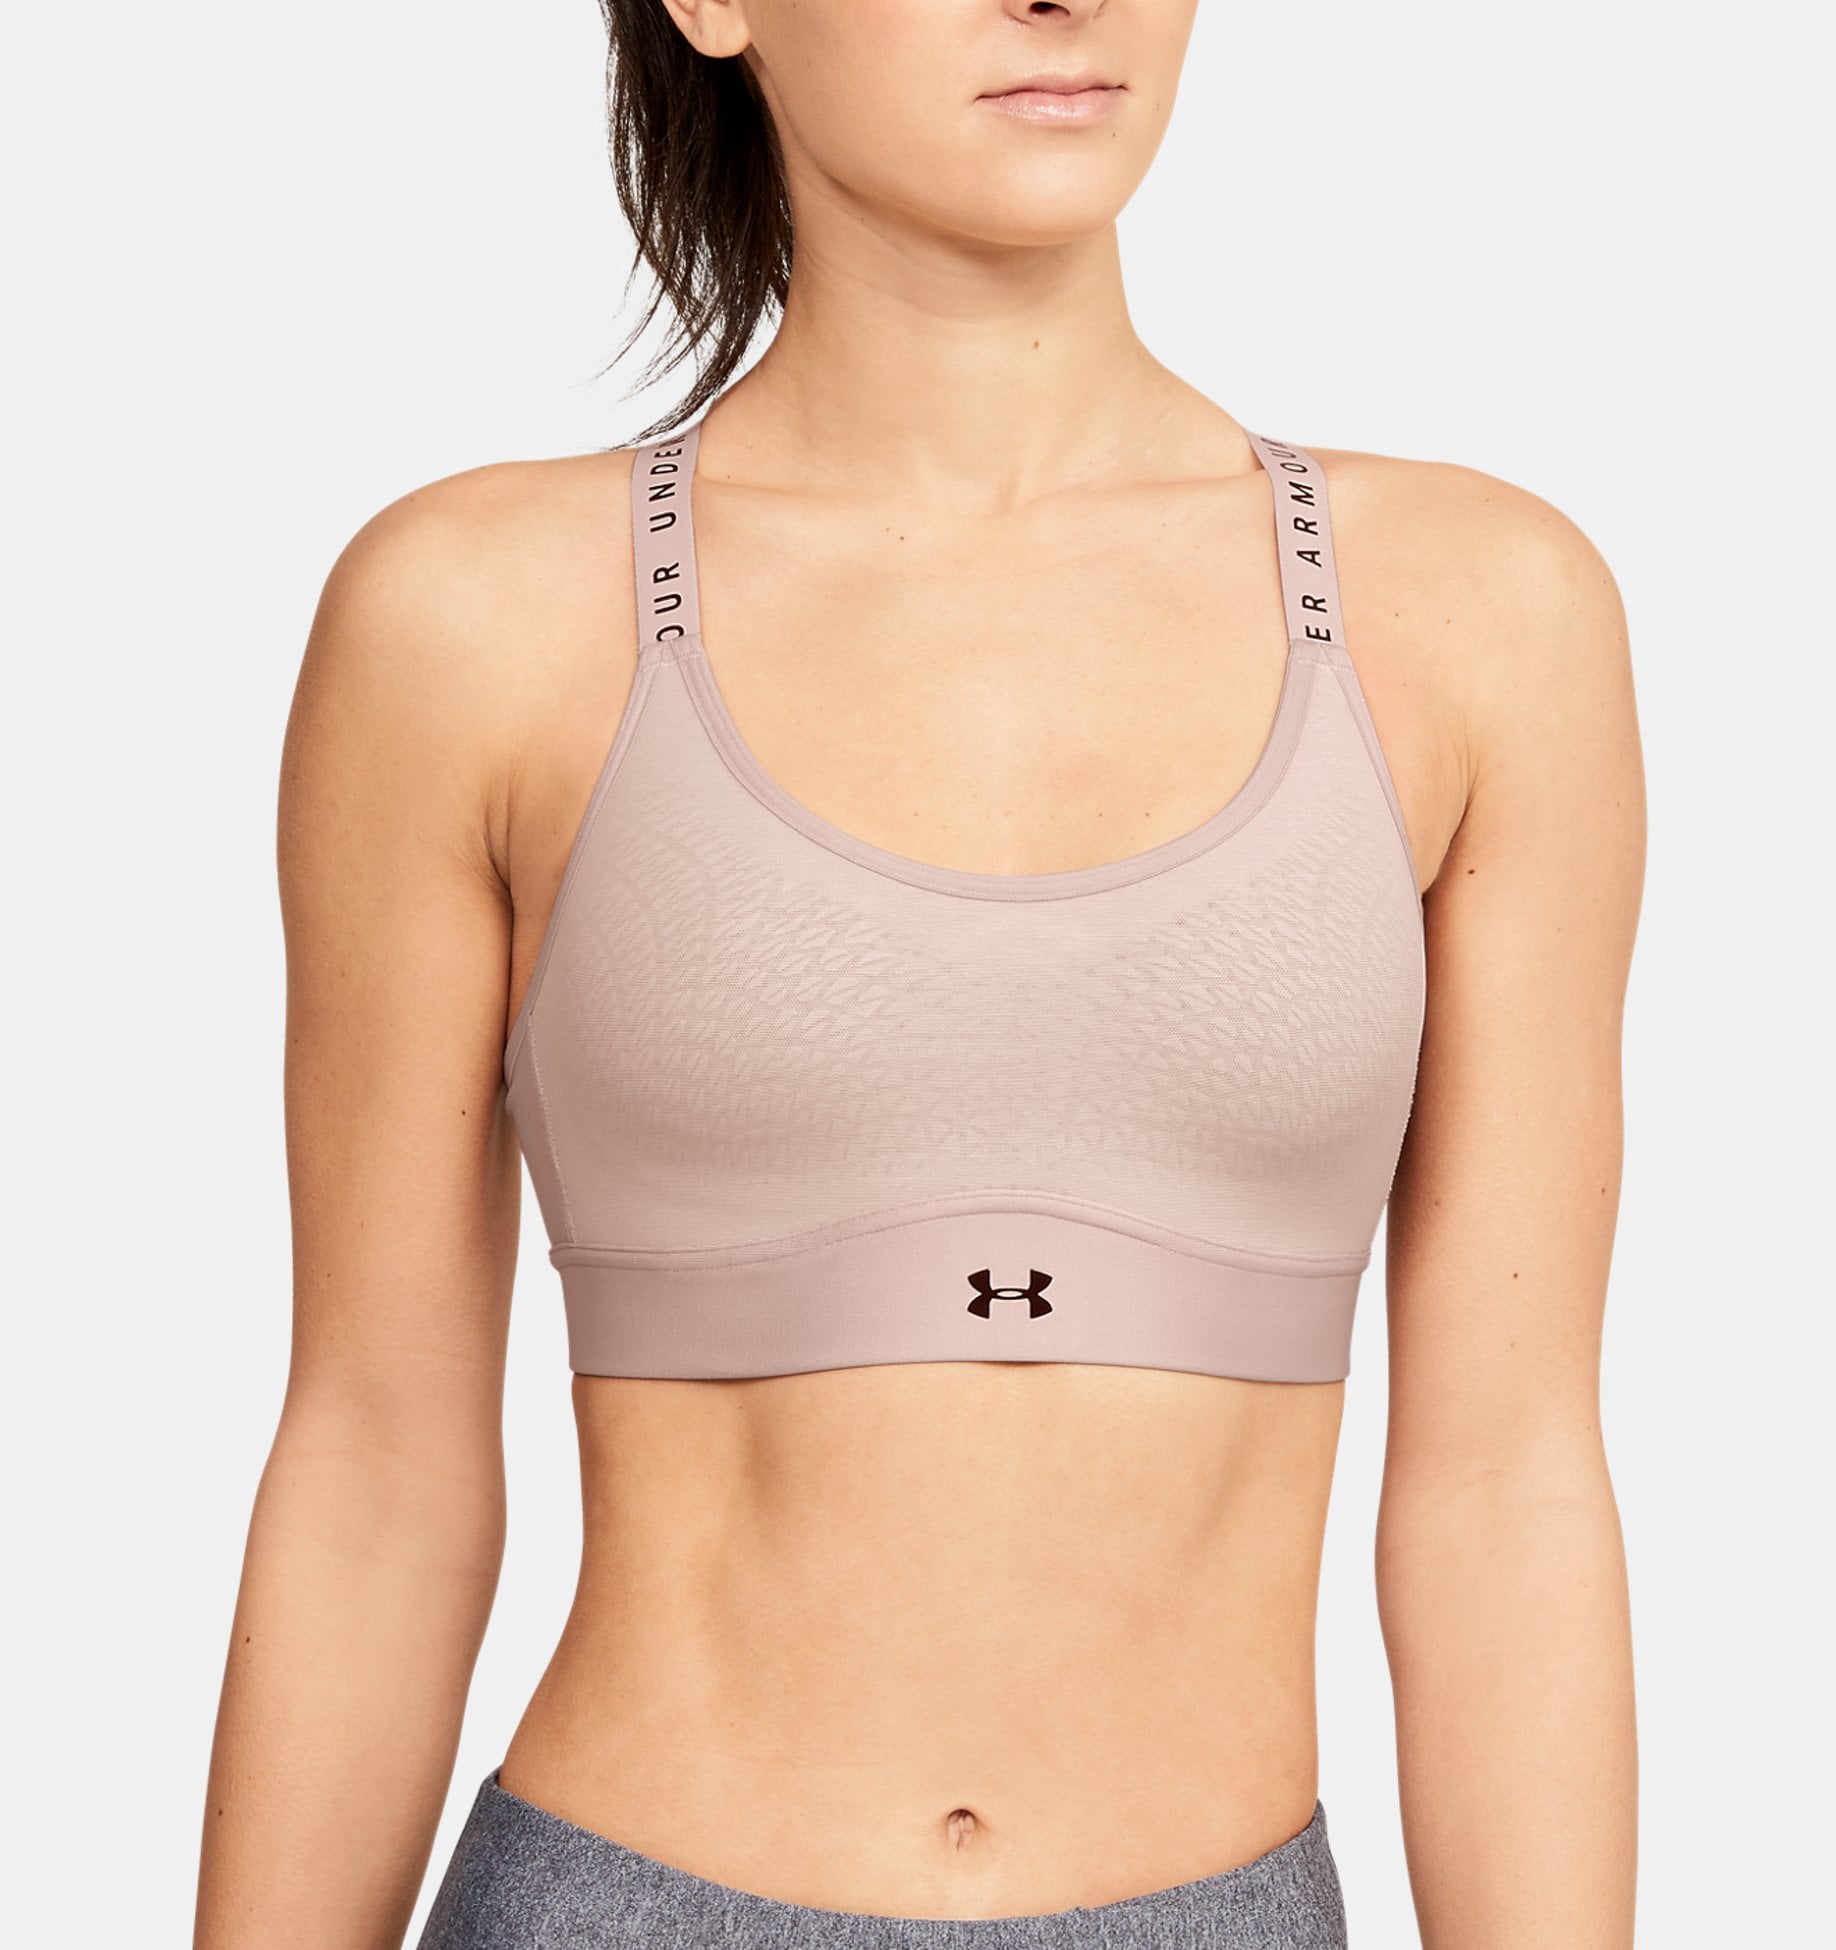 Medium-Impact Sports Bras From Under Armour to Shop